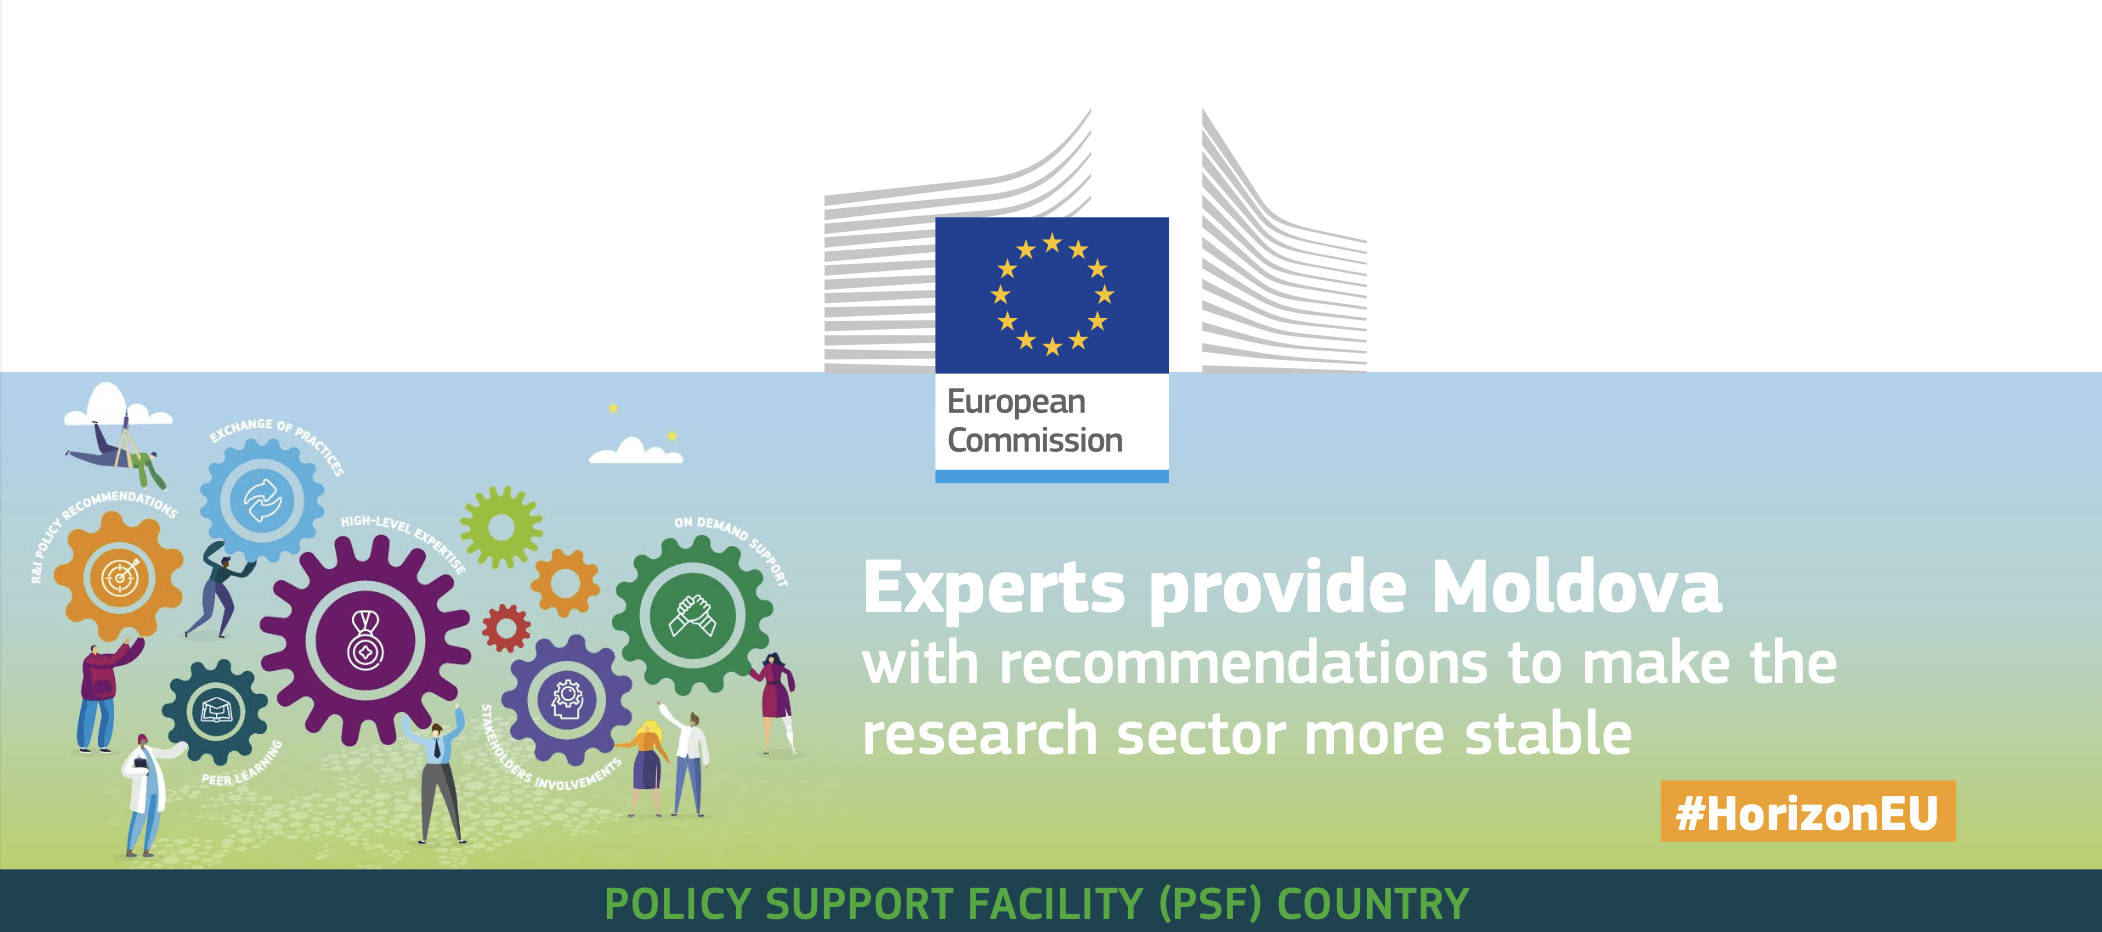 Experts provide Moldova with recommendations to make the research sector more stable